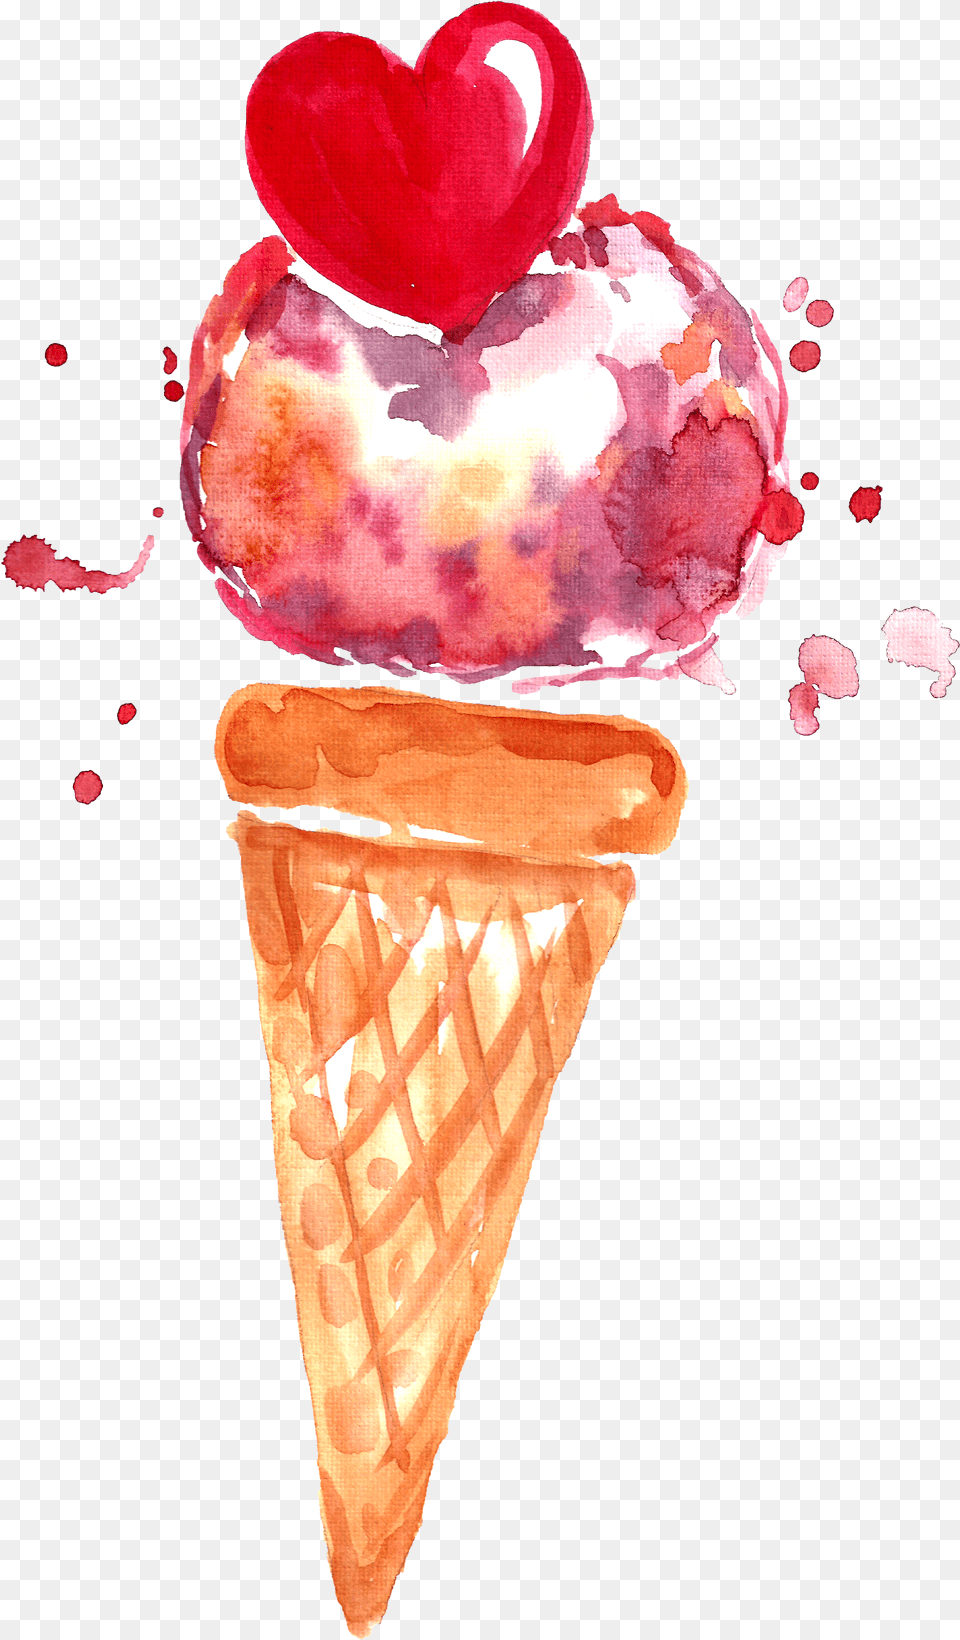 Is Not Available Ice Cream Cone Png Image